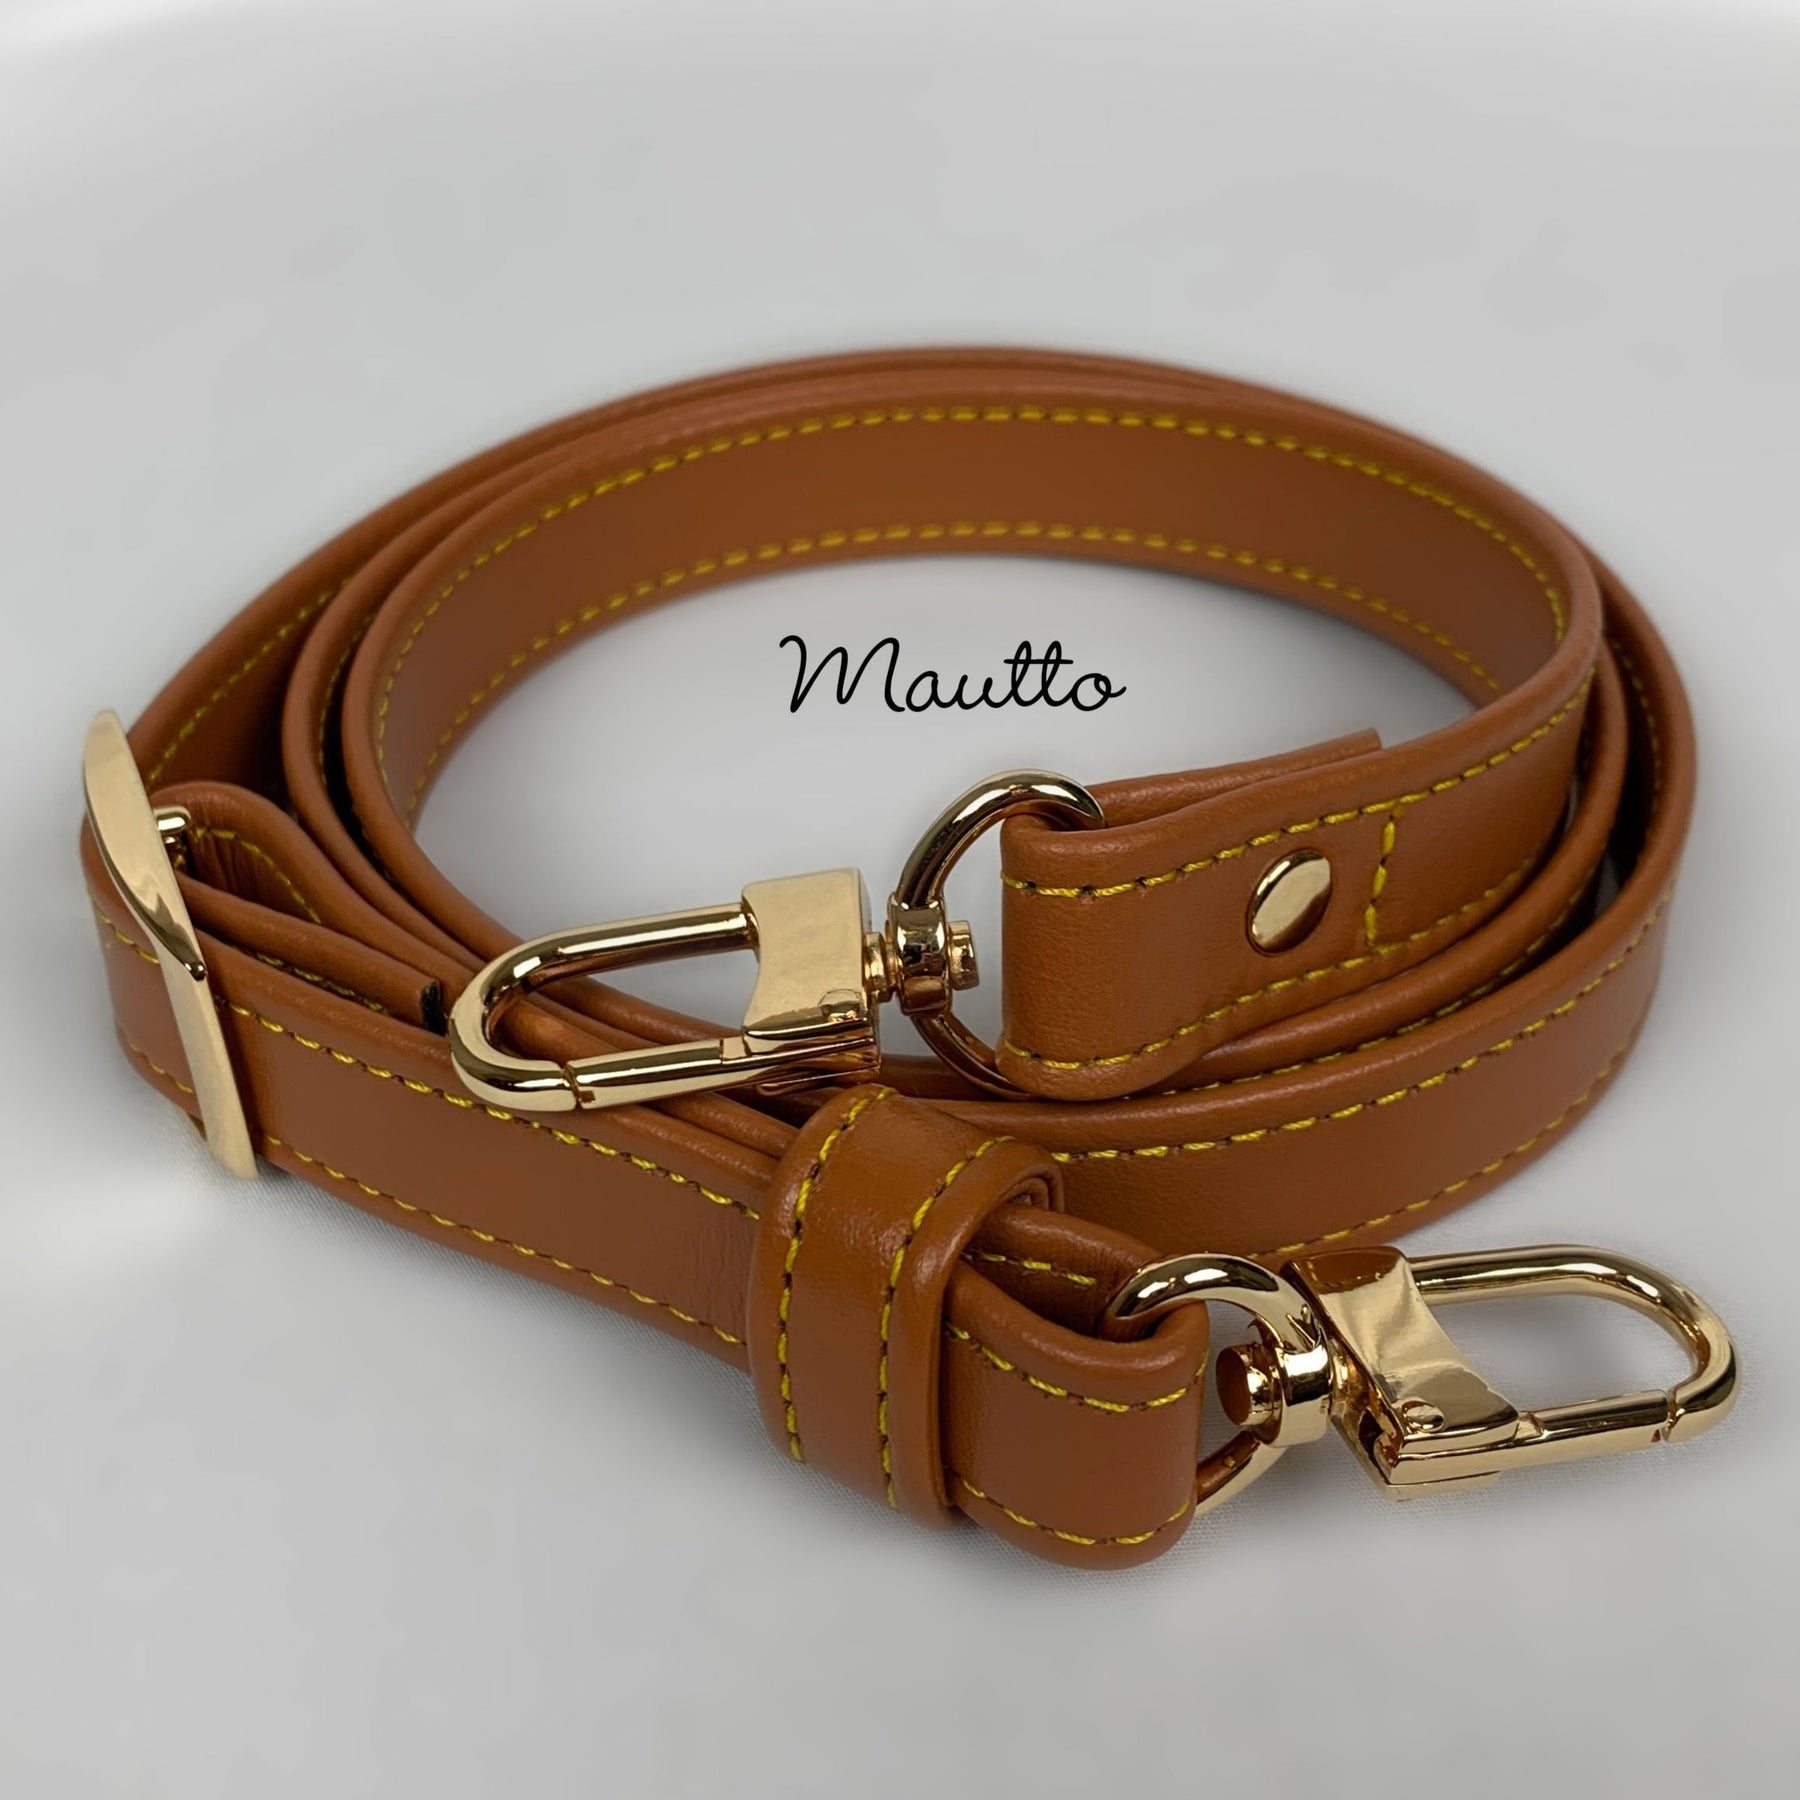 Mautto Tan Leather Strap with Yellow Stitching for Petite Louis Vuitton Bags Dark Tan Leather / 45-65 Extra Long Crossbody / Silver-Tone